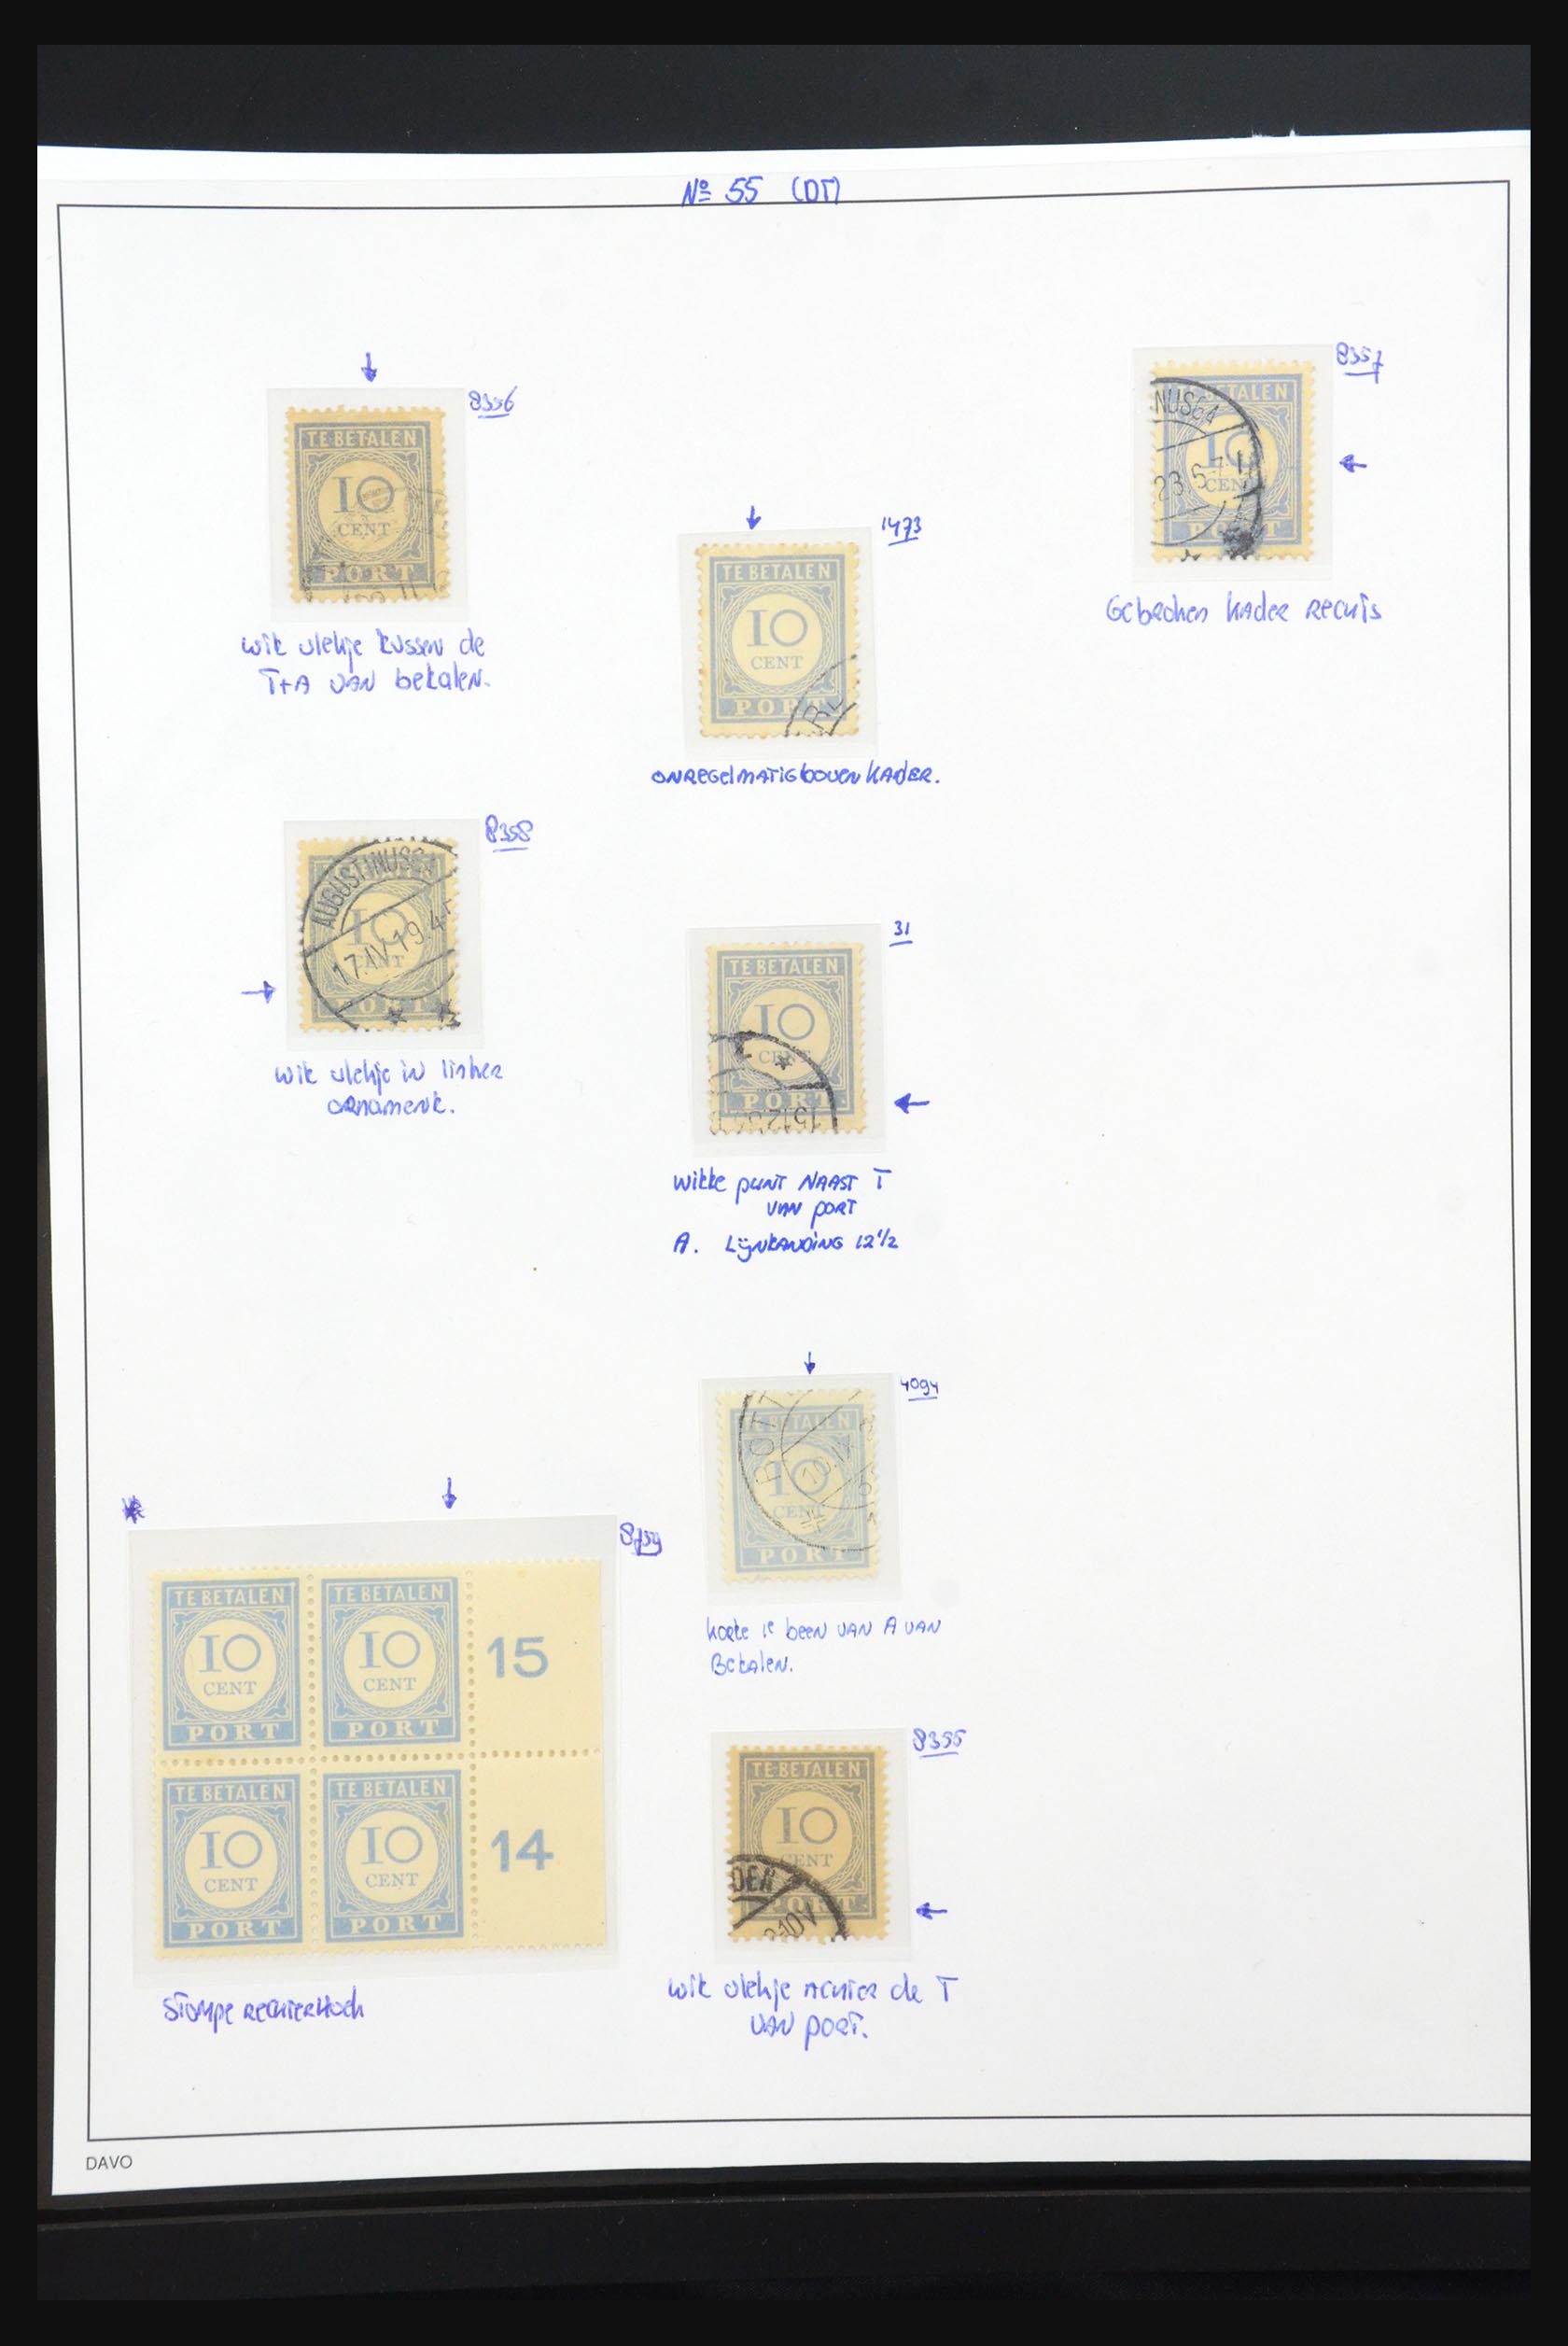 31623 046 - 31623 Netherlands postage dues plateflaws.